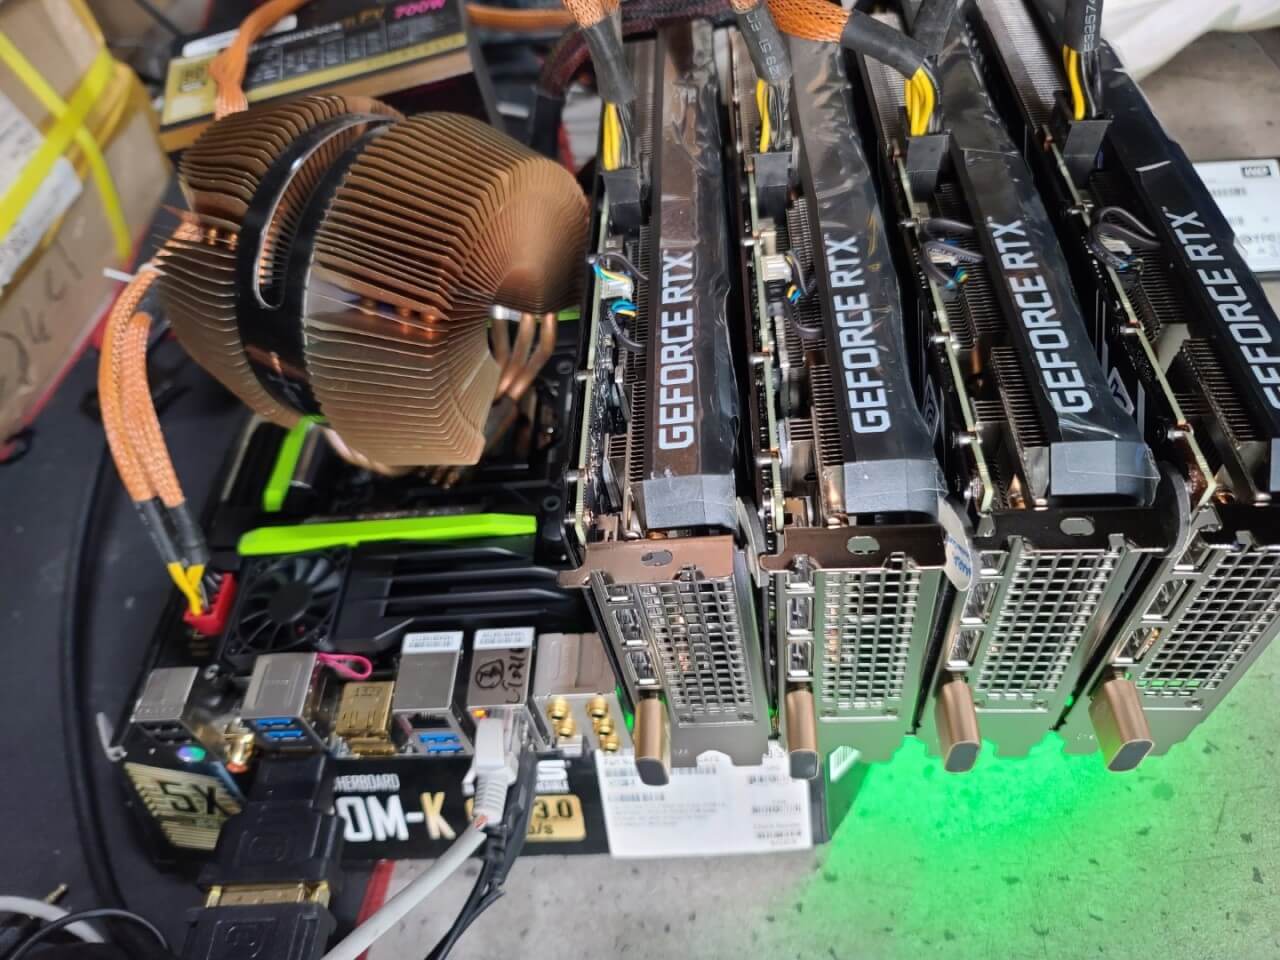 NVIDIA GeForce RTX 3060 Cryptocurrency Mining GPU Hash Rate Limit Bypass Using Dummy HDMI